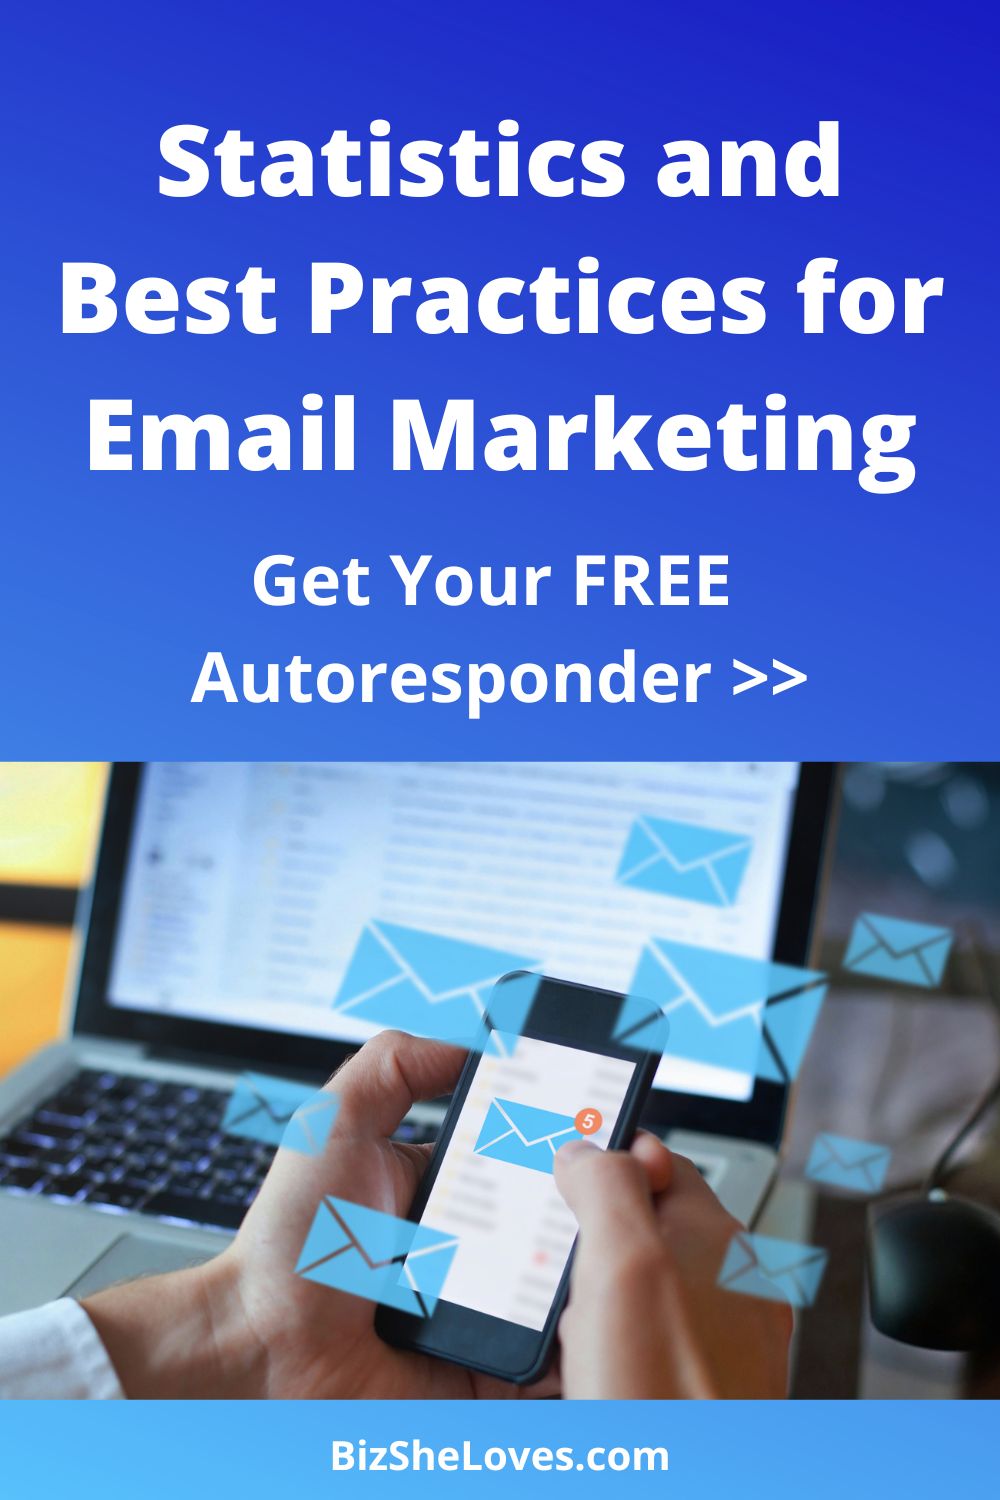 Using Email Marketing Strategies? Get Statistics and Best Practices